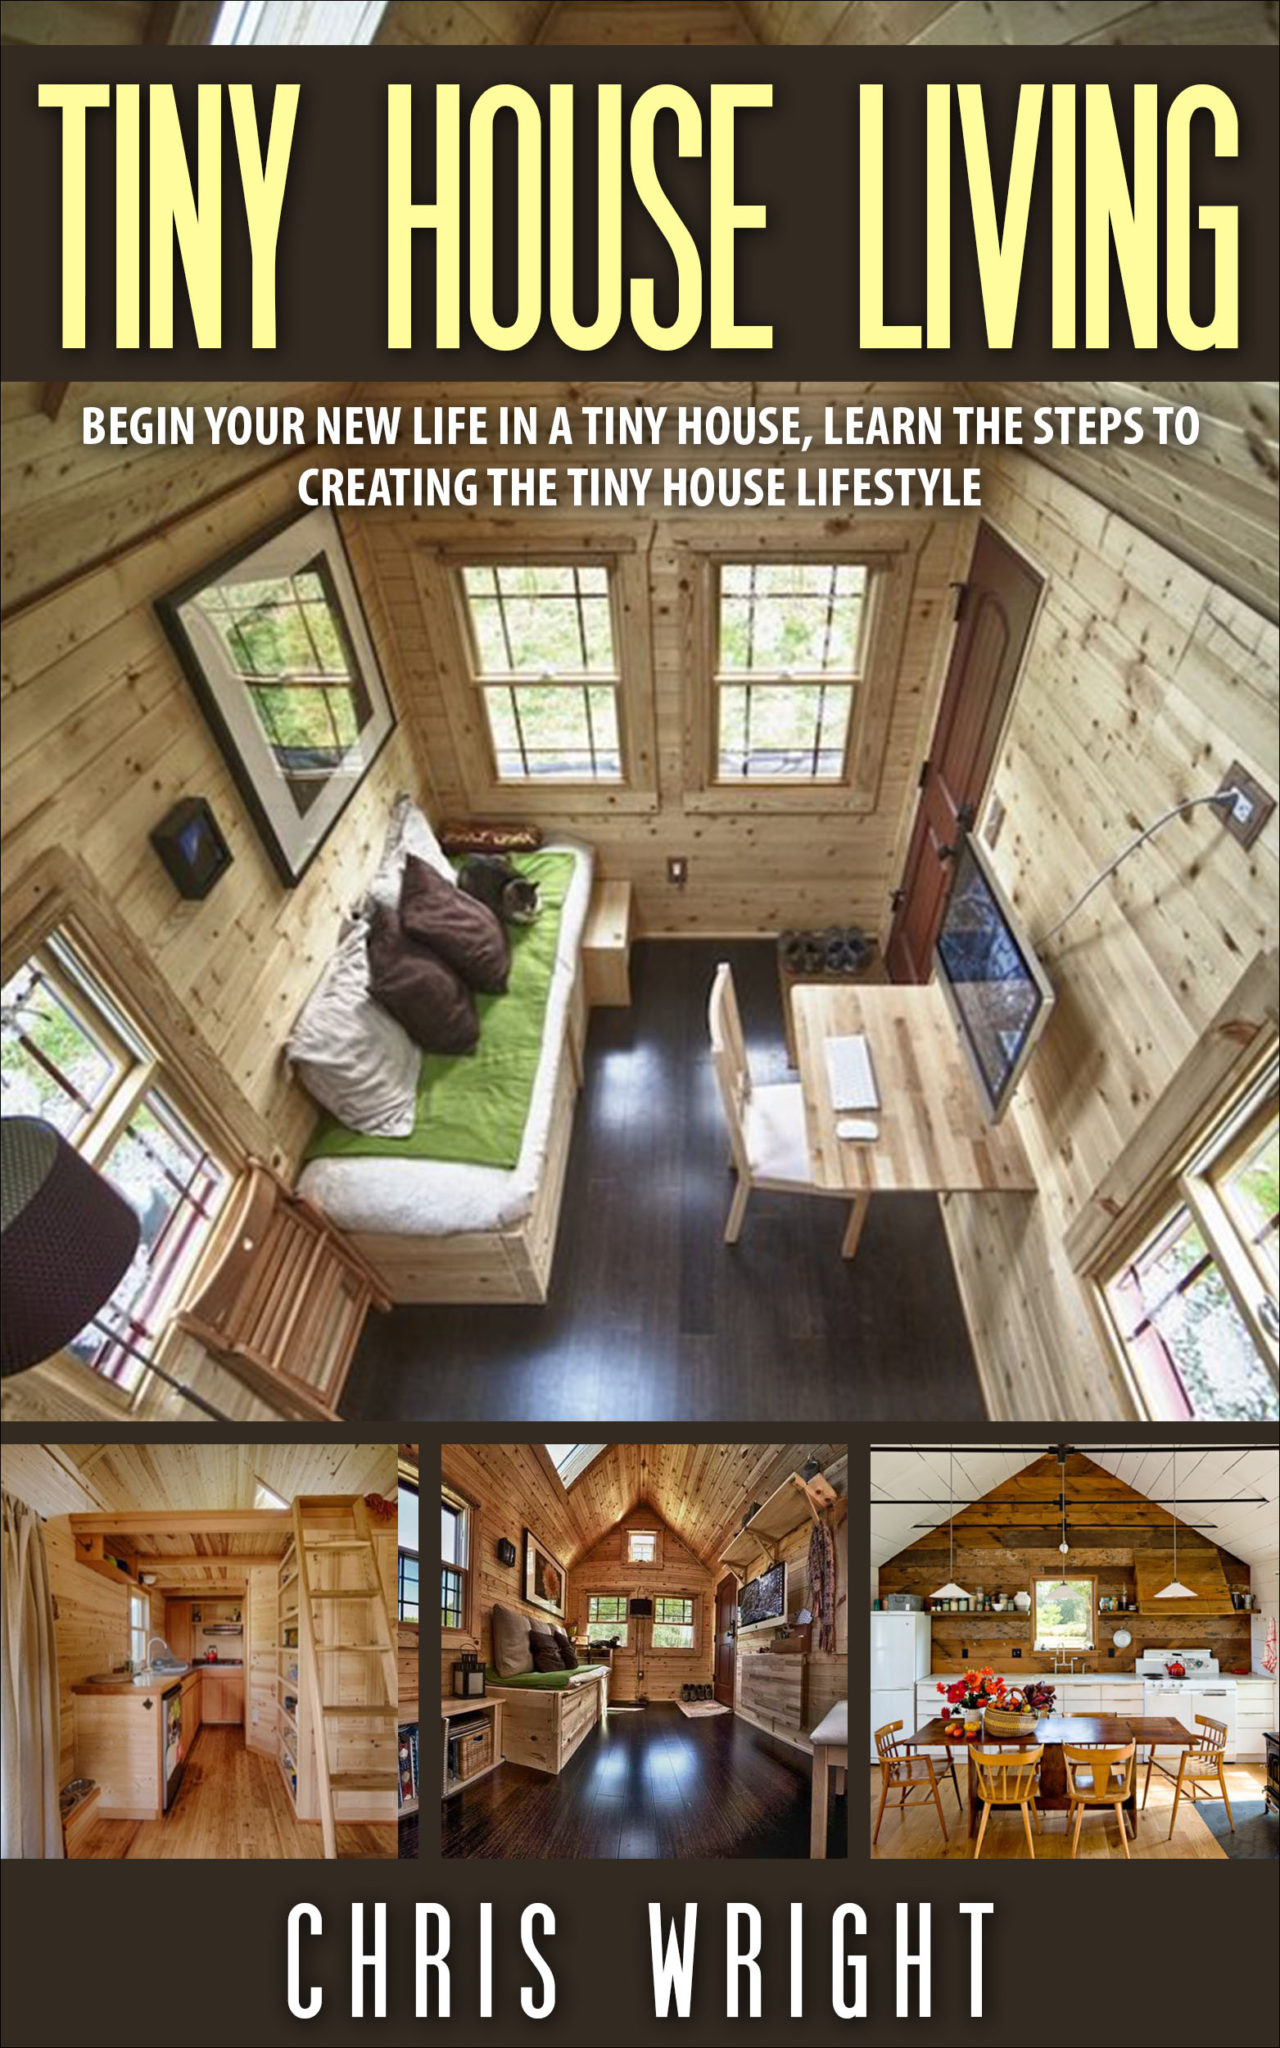 FREE: Tiny House Living by Chris Wright